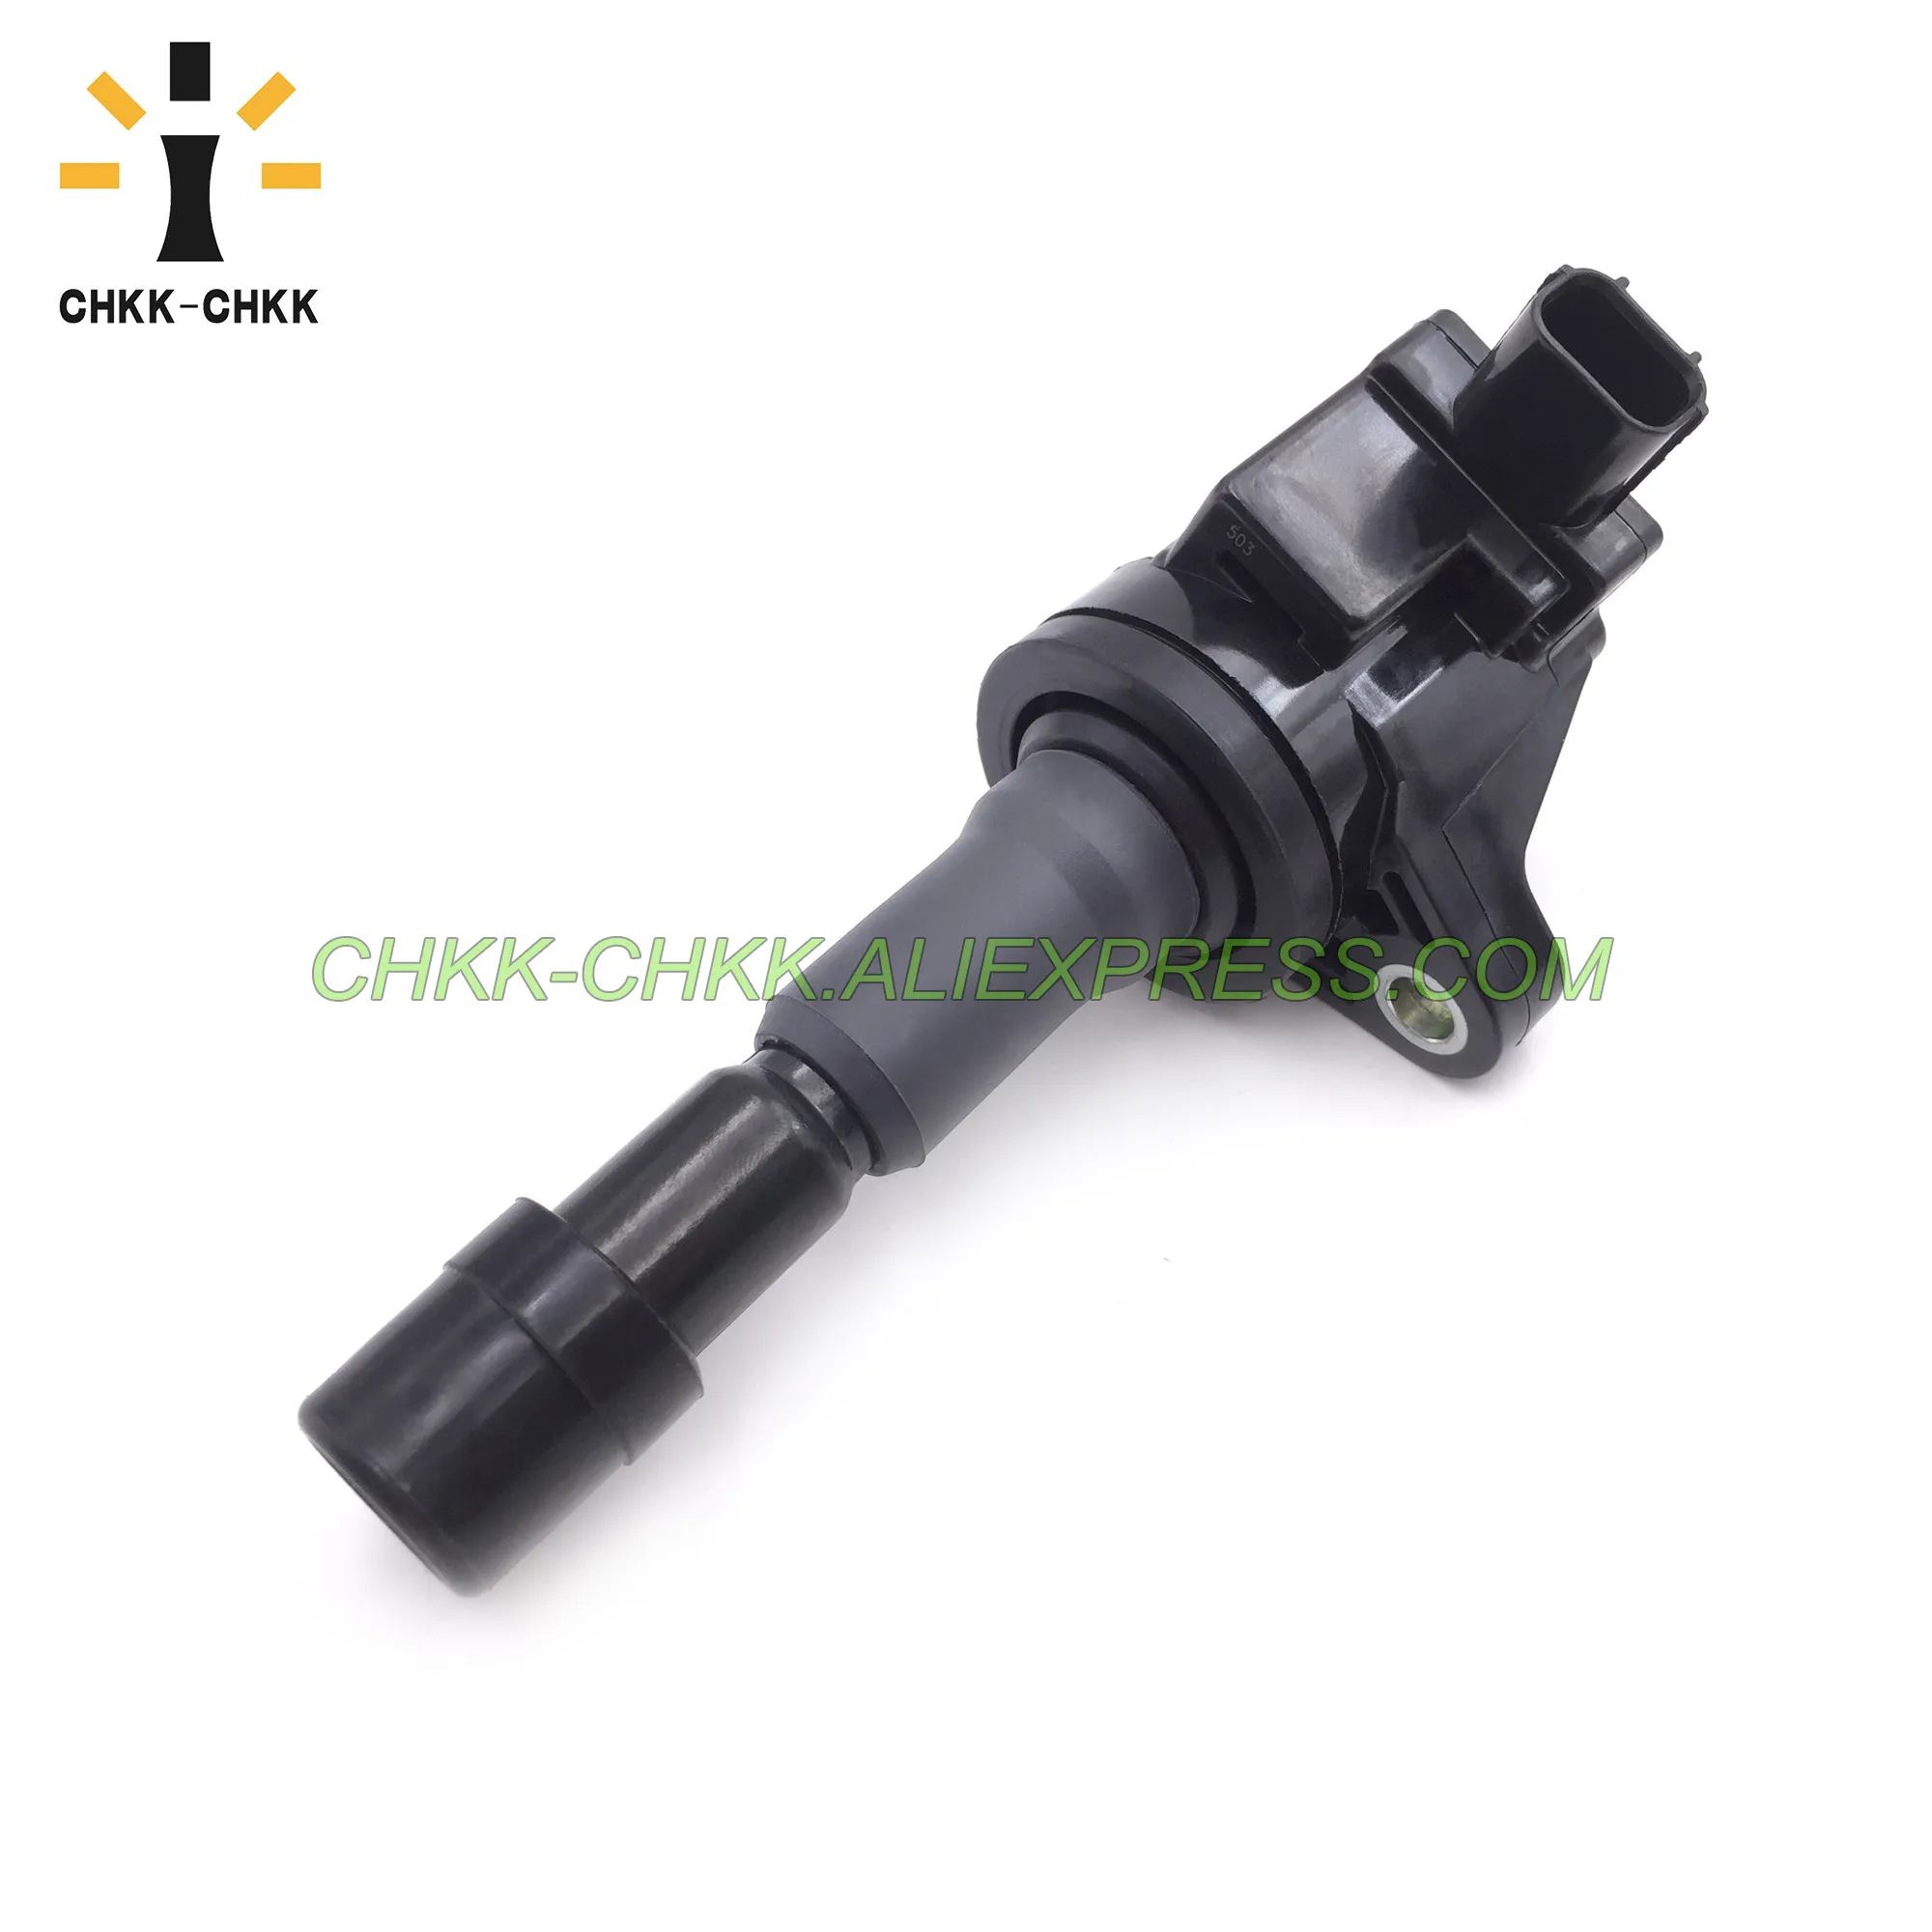 

CHKK-CHKK 4PCS Car Accessory new Ignition Coil 30520-RB0-003 for HONDA CITY Saloon CIVIC VIII Hatchback FIT III 30520RB0003